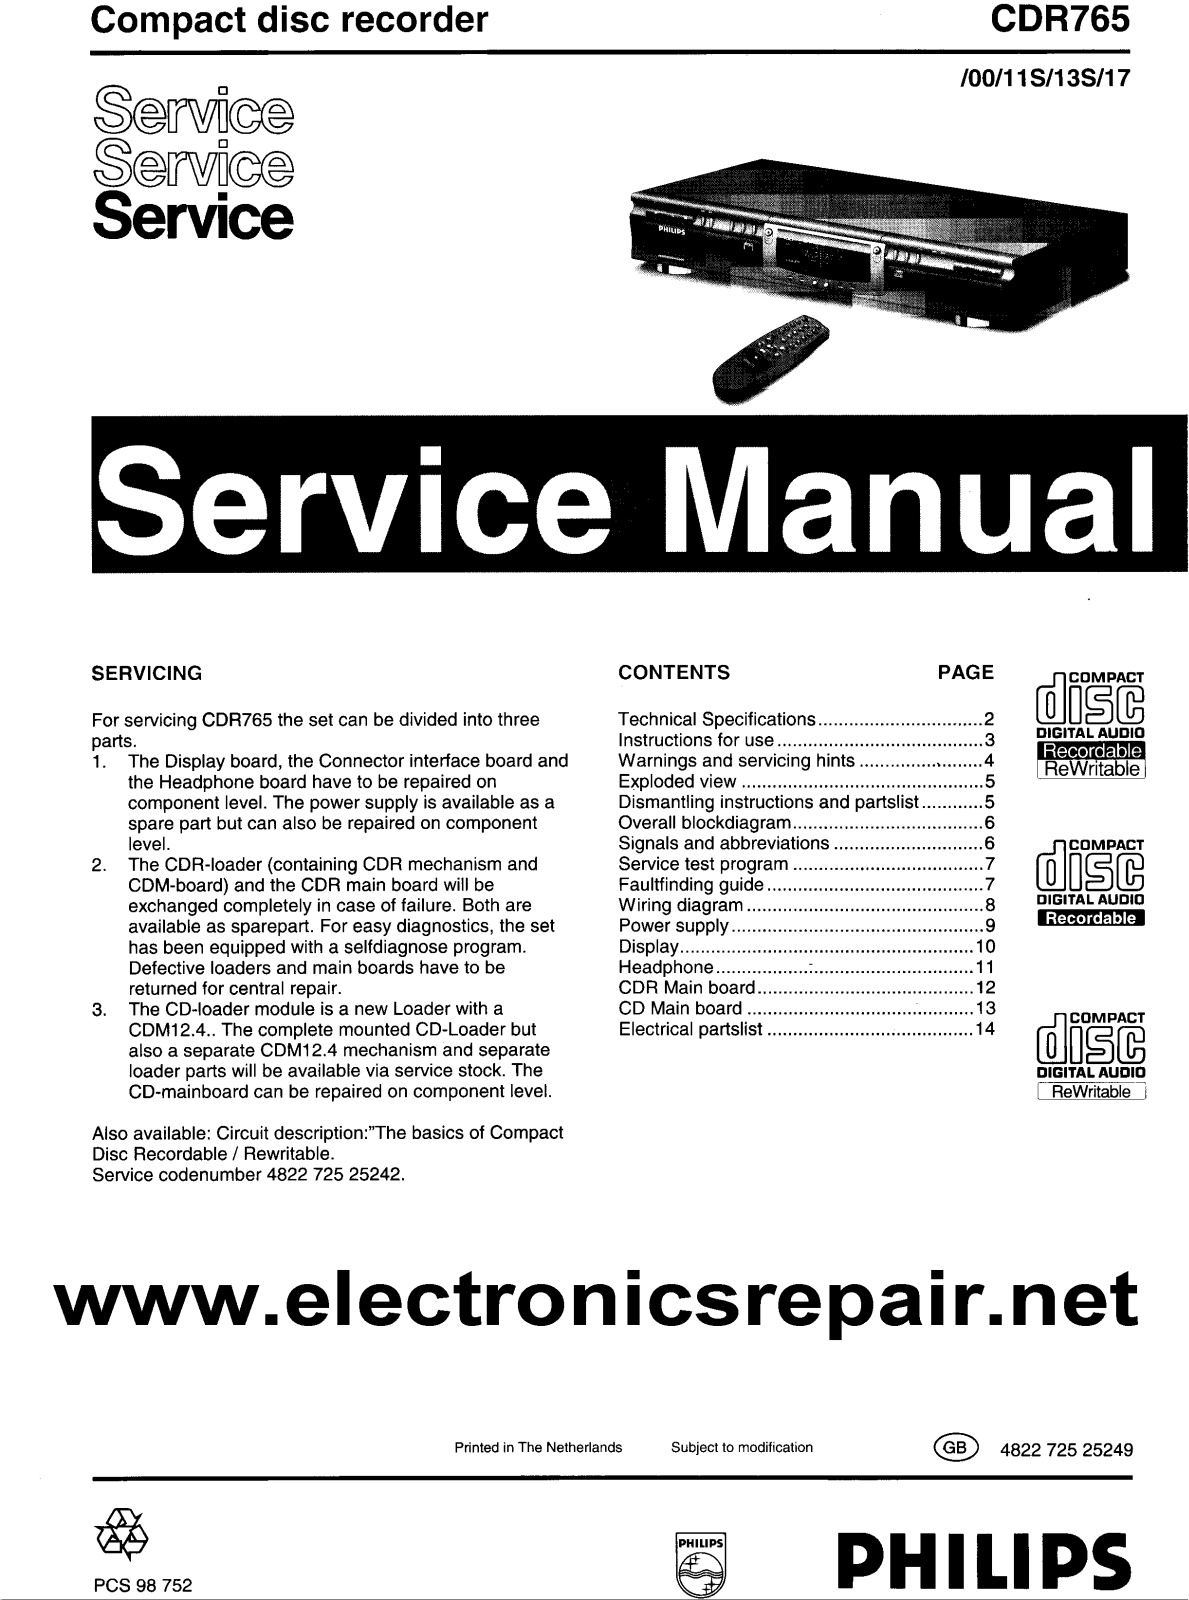 Philips CDR-765 Service manual